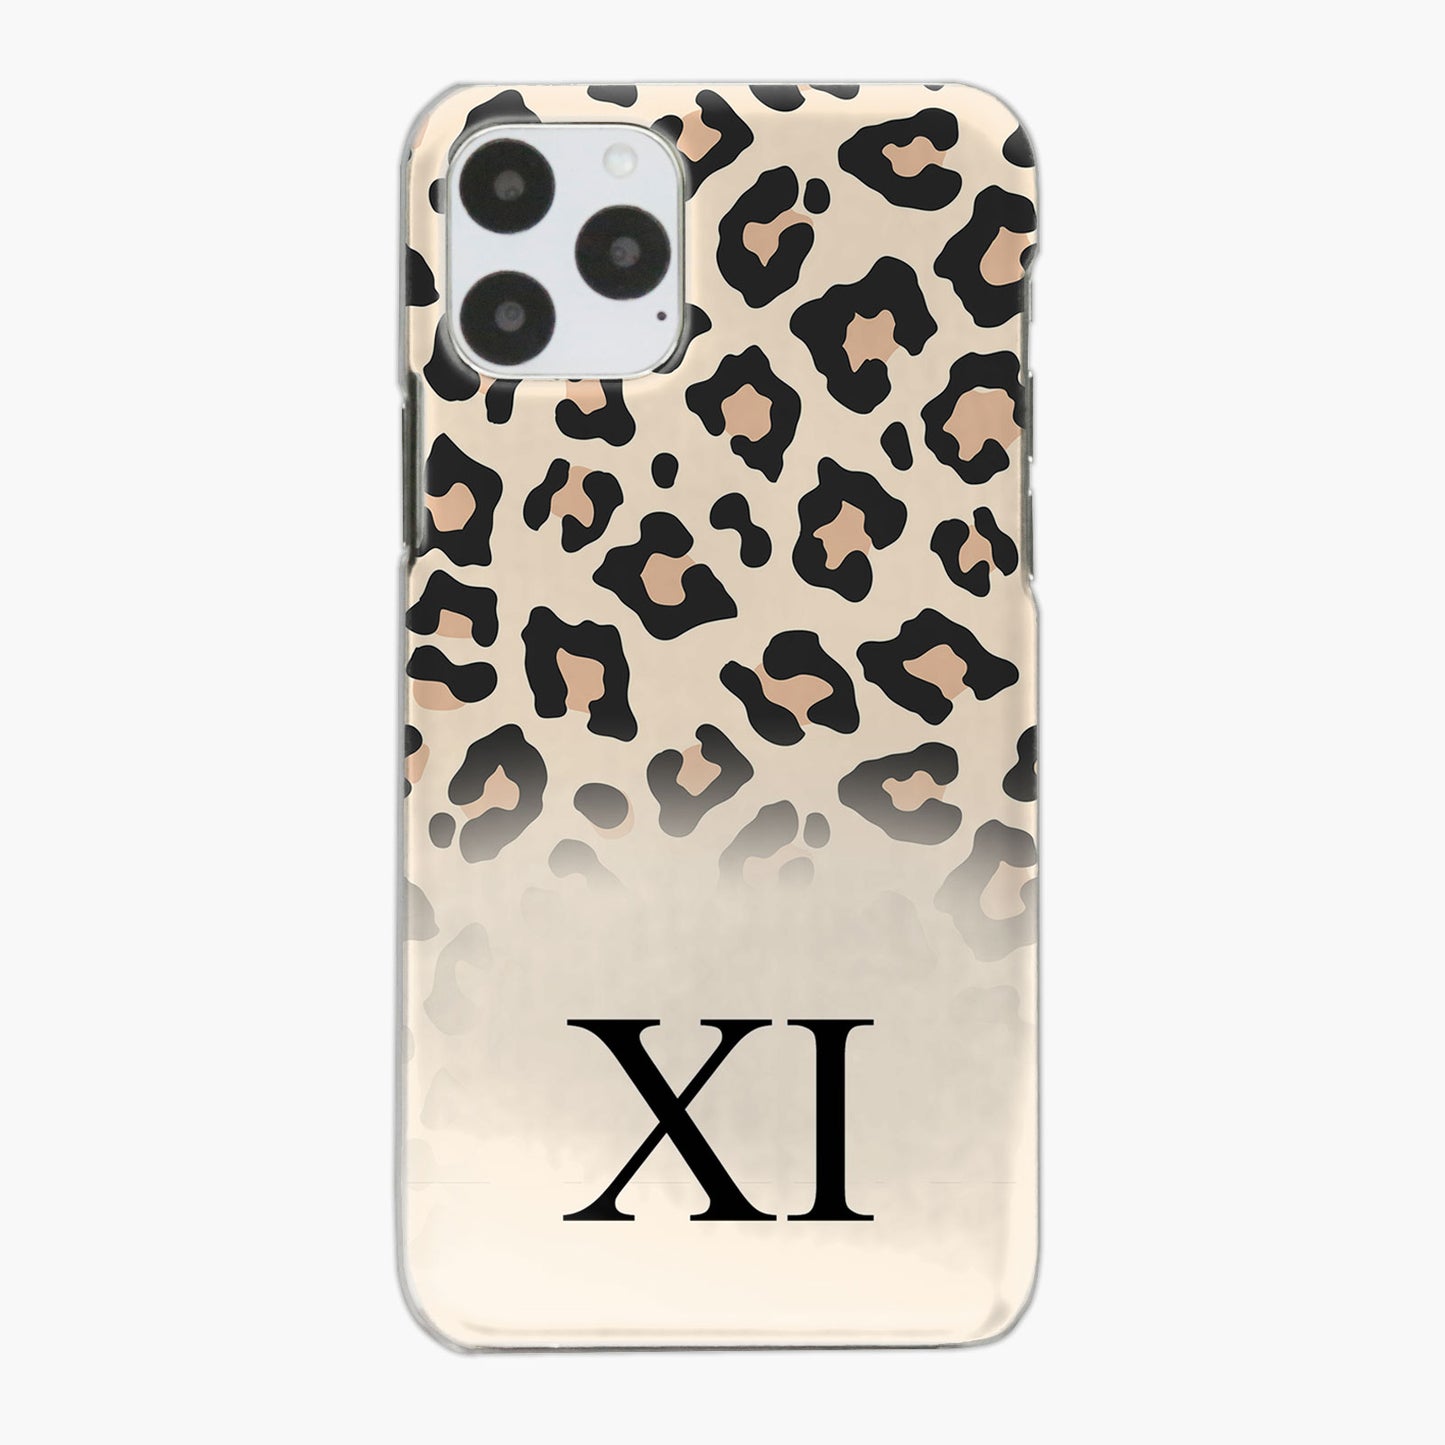 Personalised Apple iPhone Hard Case Black Initial on White Leopard Print